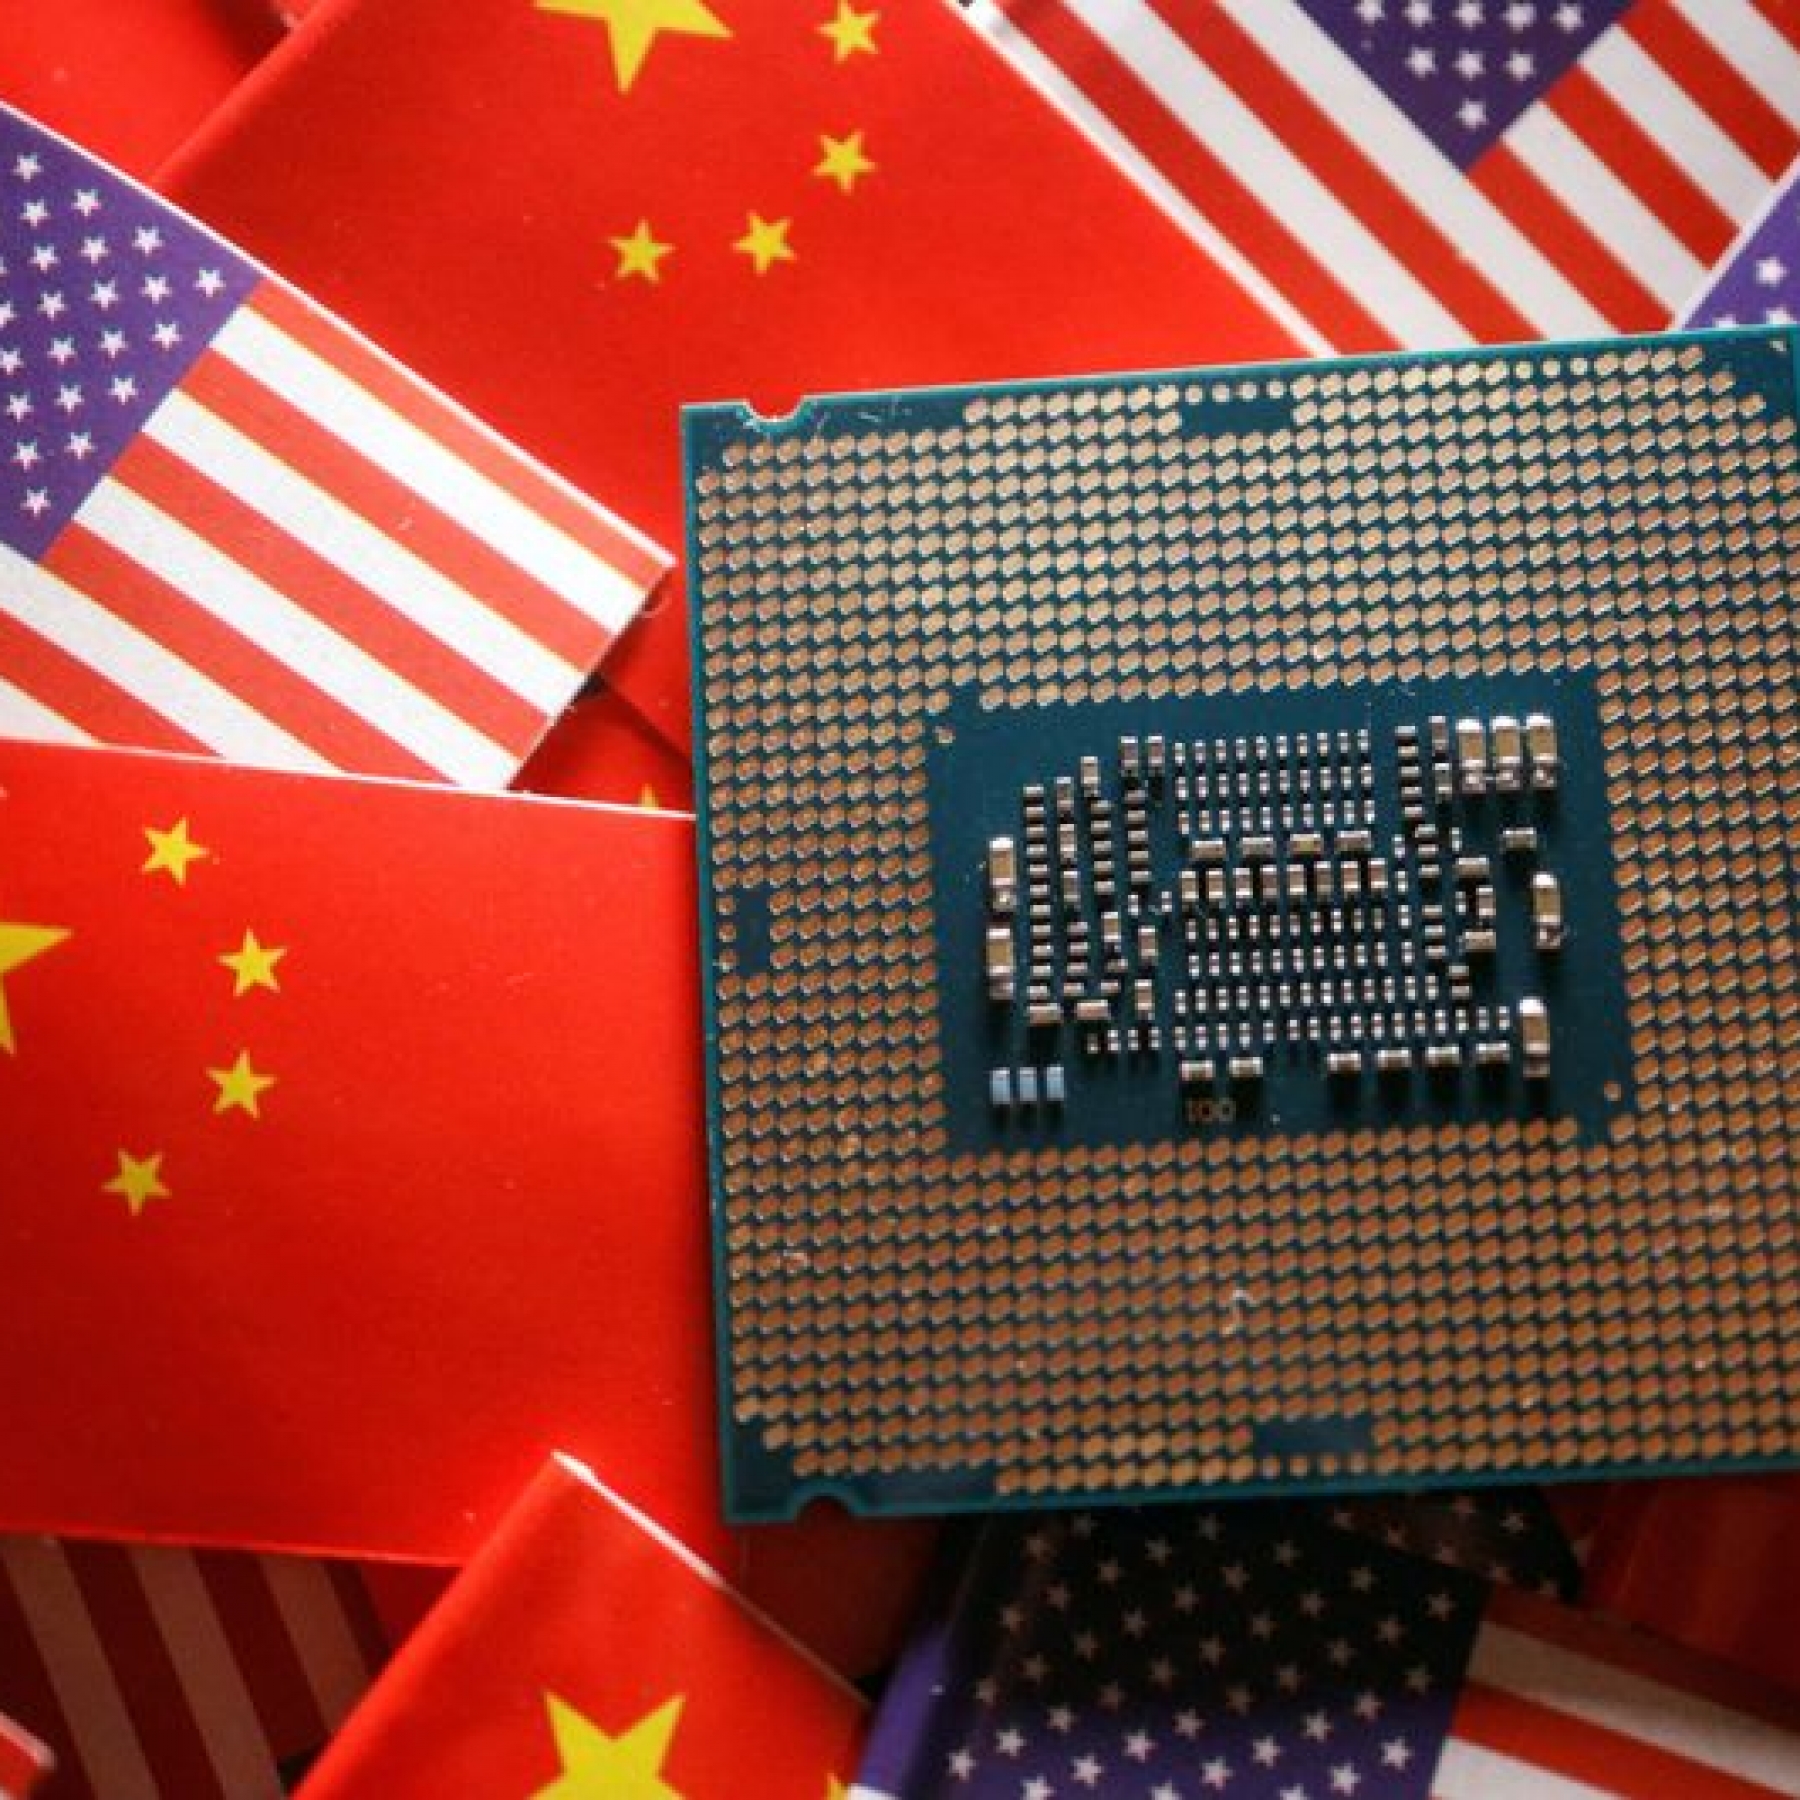 Chip stocks drop on fears US to toughen China rules